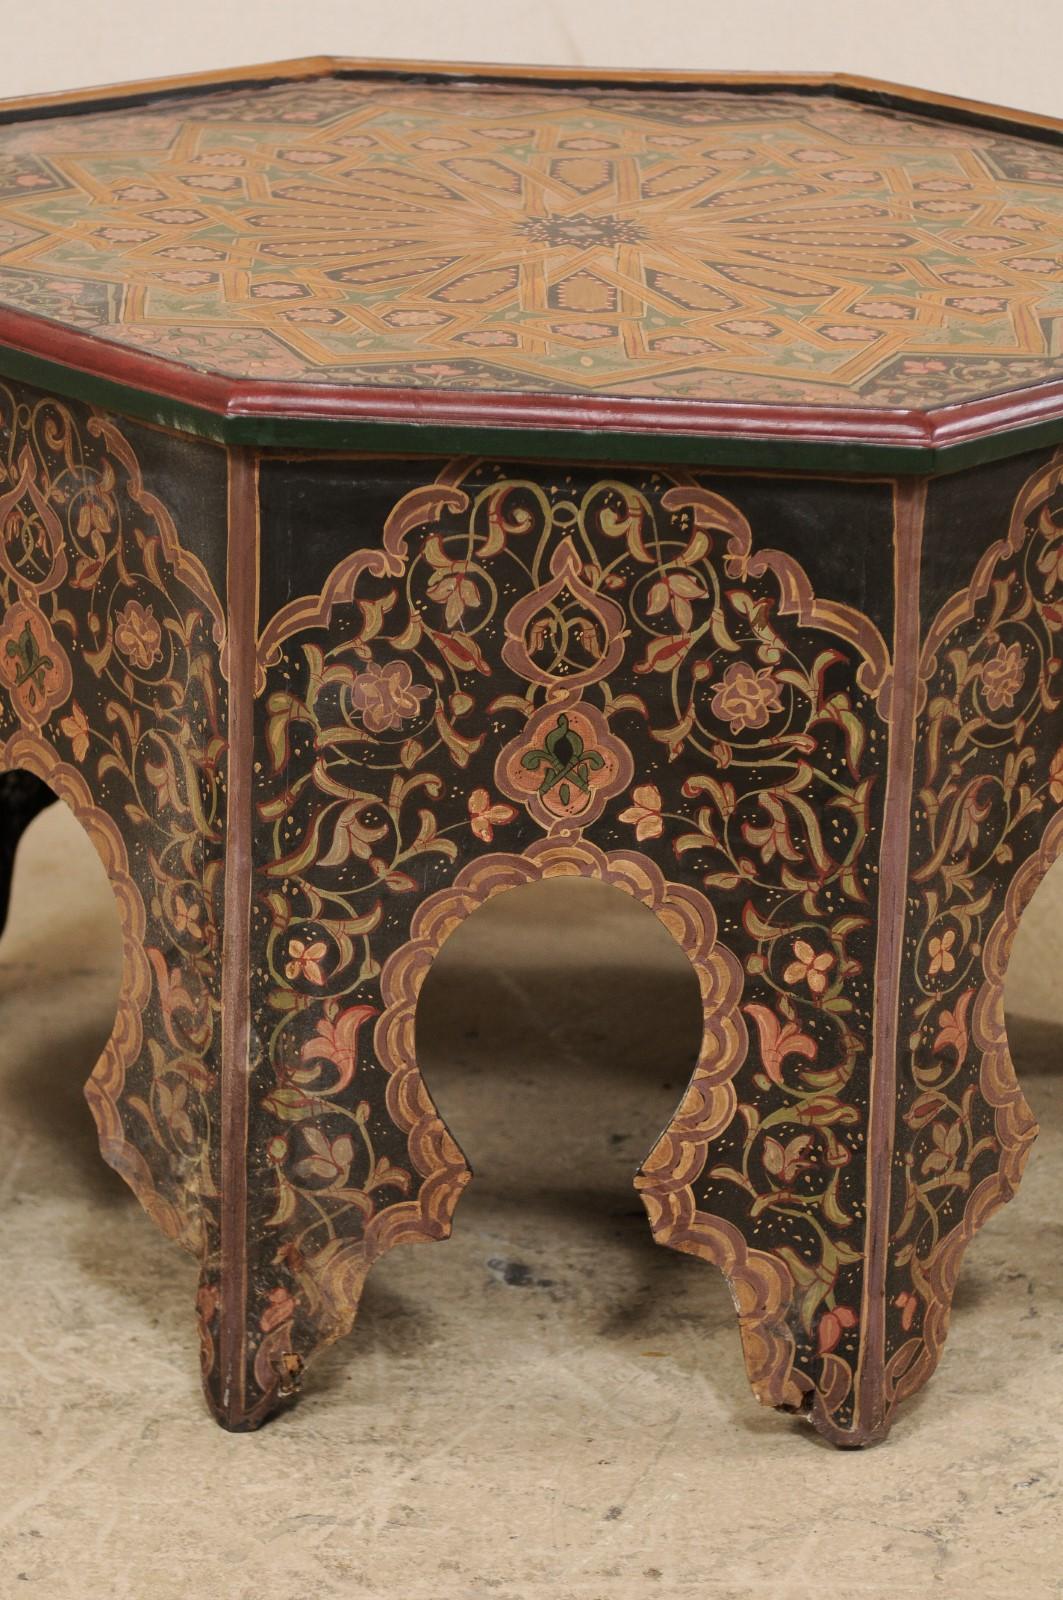 Hand-Painted Moroccan Coffee or Tea Table Adorn with Intricate Floral and Geometric Paintings